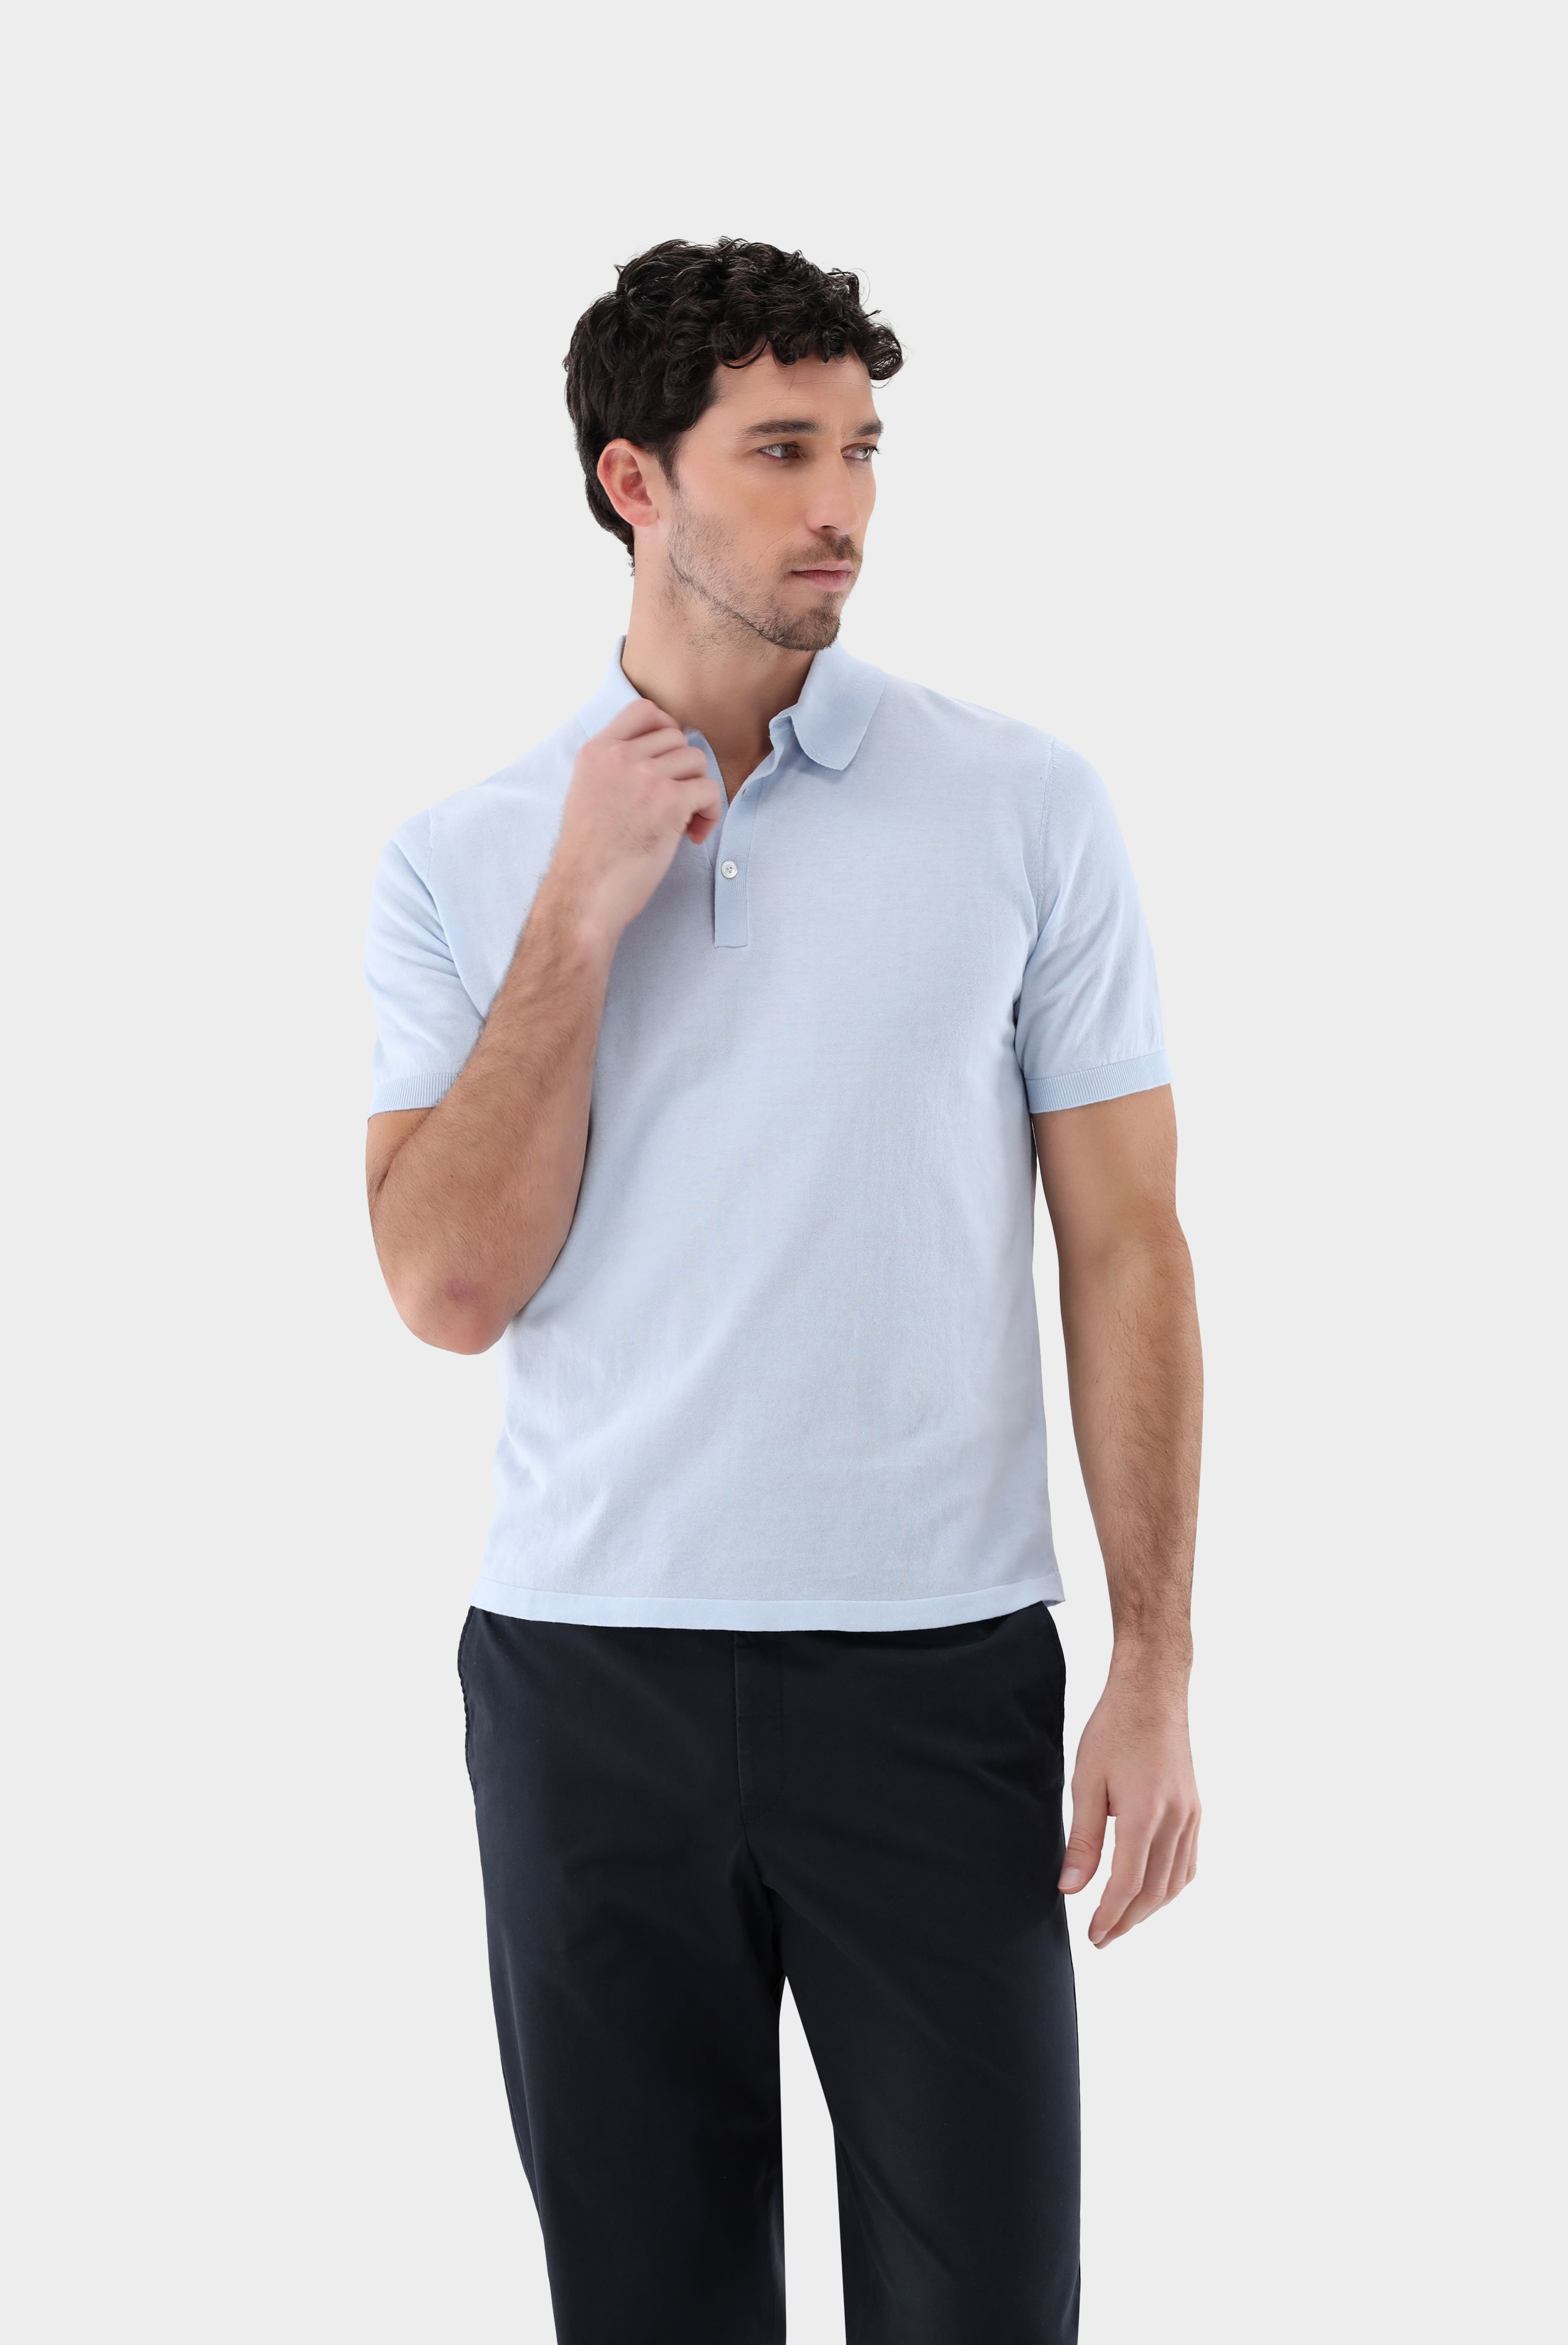 Knit Polo made of Air Cotton